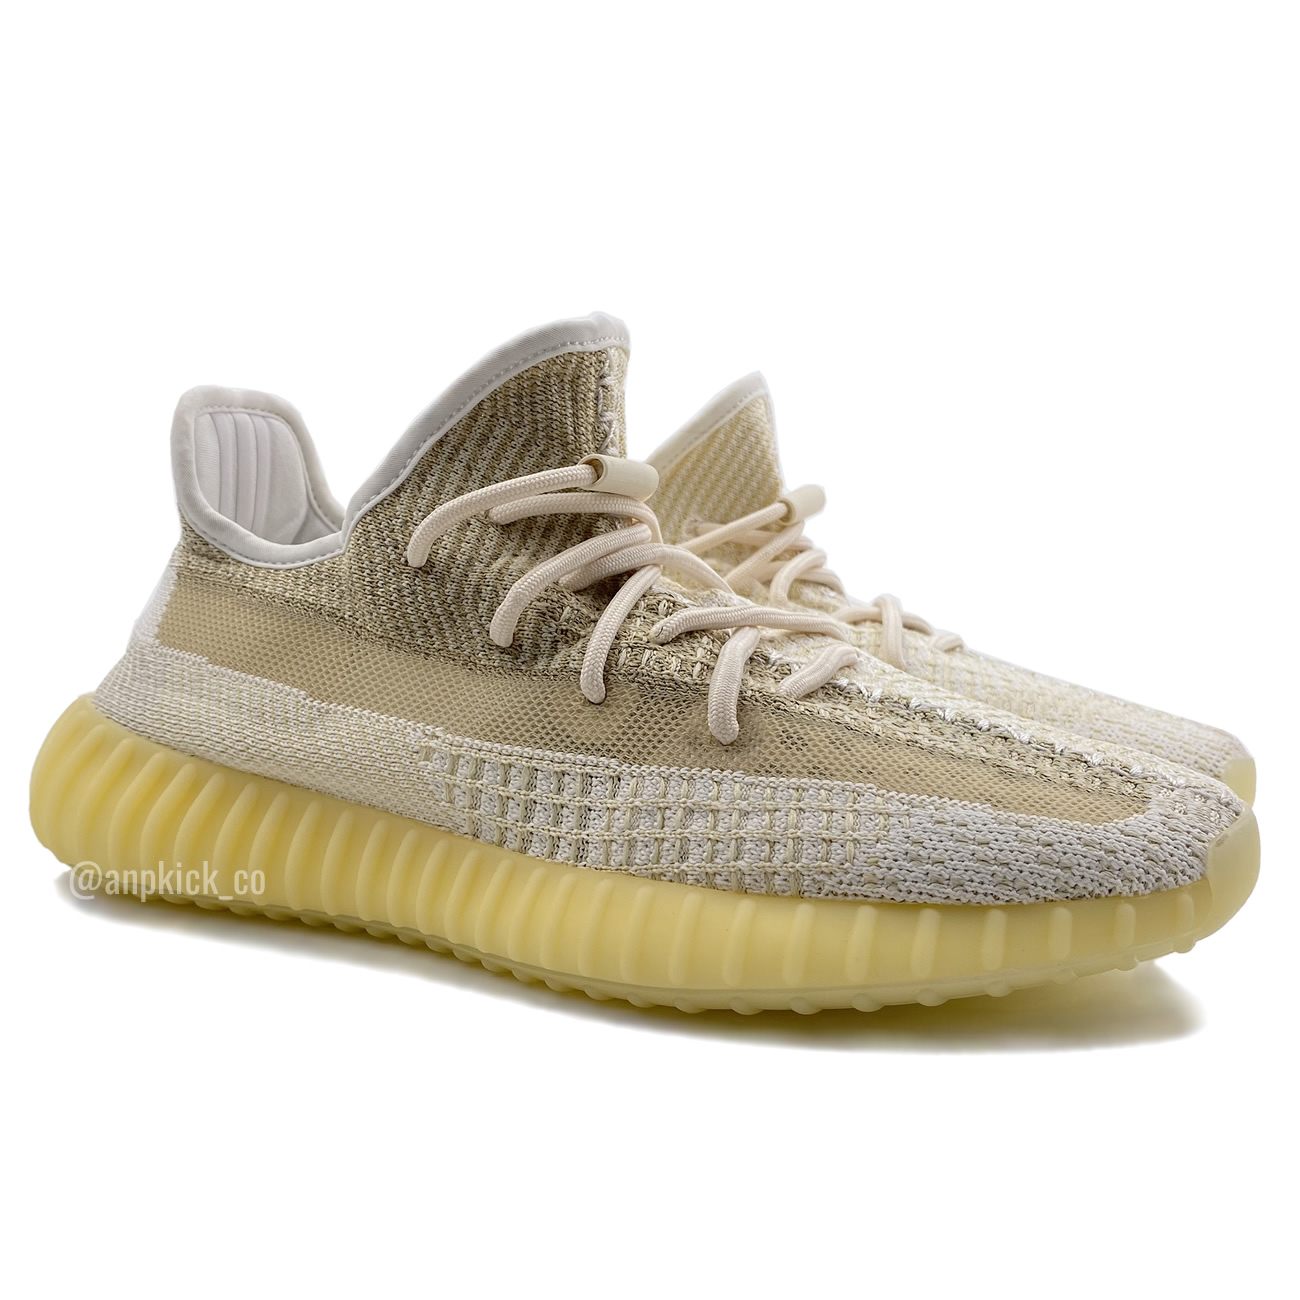 adidas Yeezy Boost 350 V2 "Natural" FZ5246 For Sale